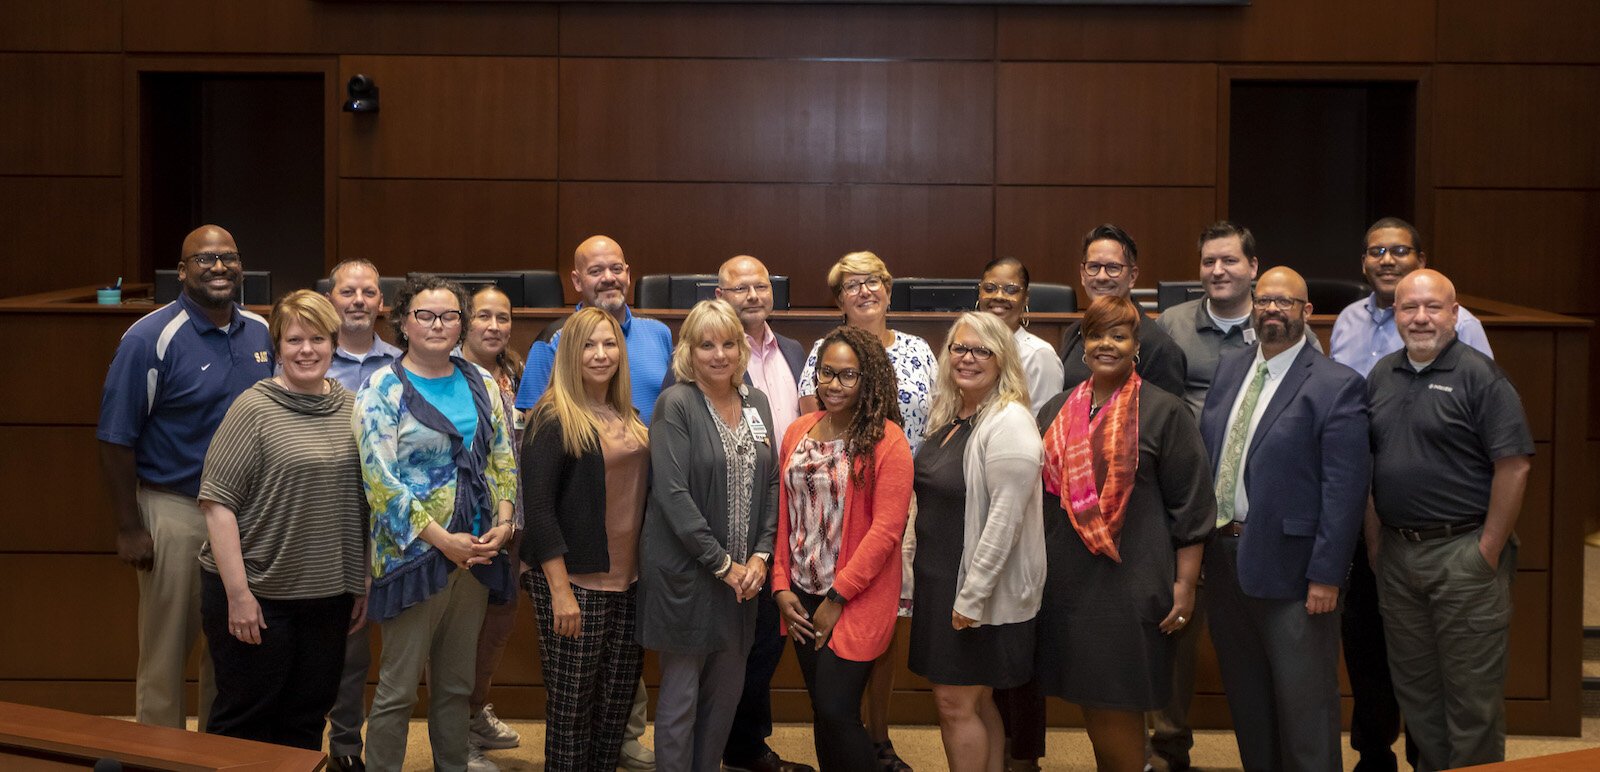 The first L.E.A.D. class that graduated in June consisted entirely of Parkview Health employees.